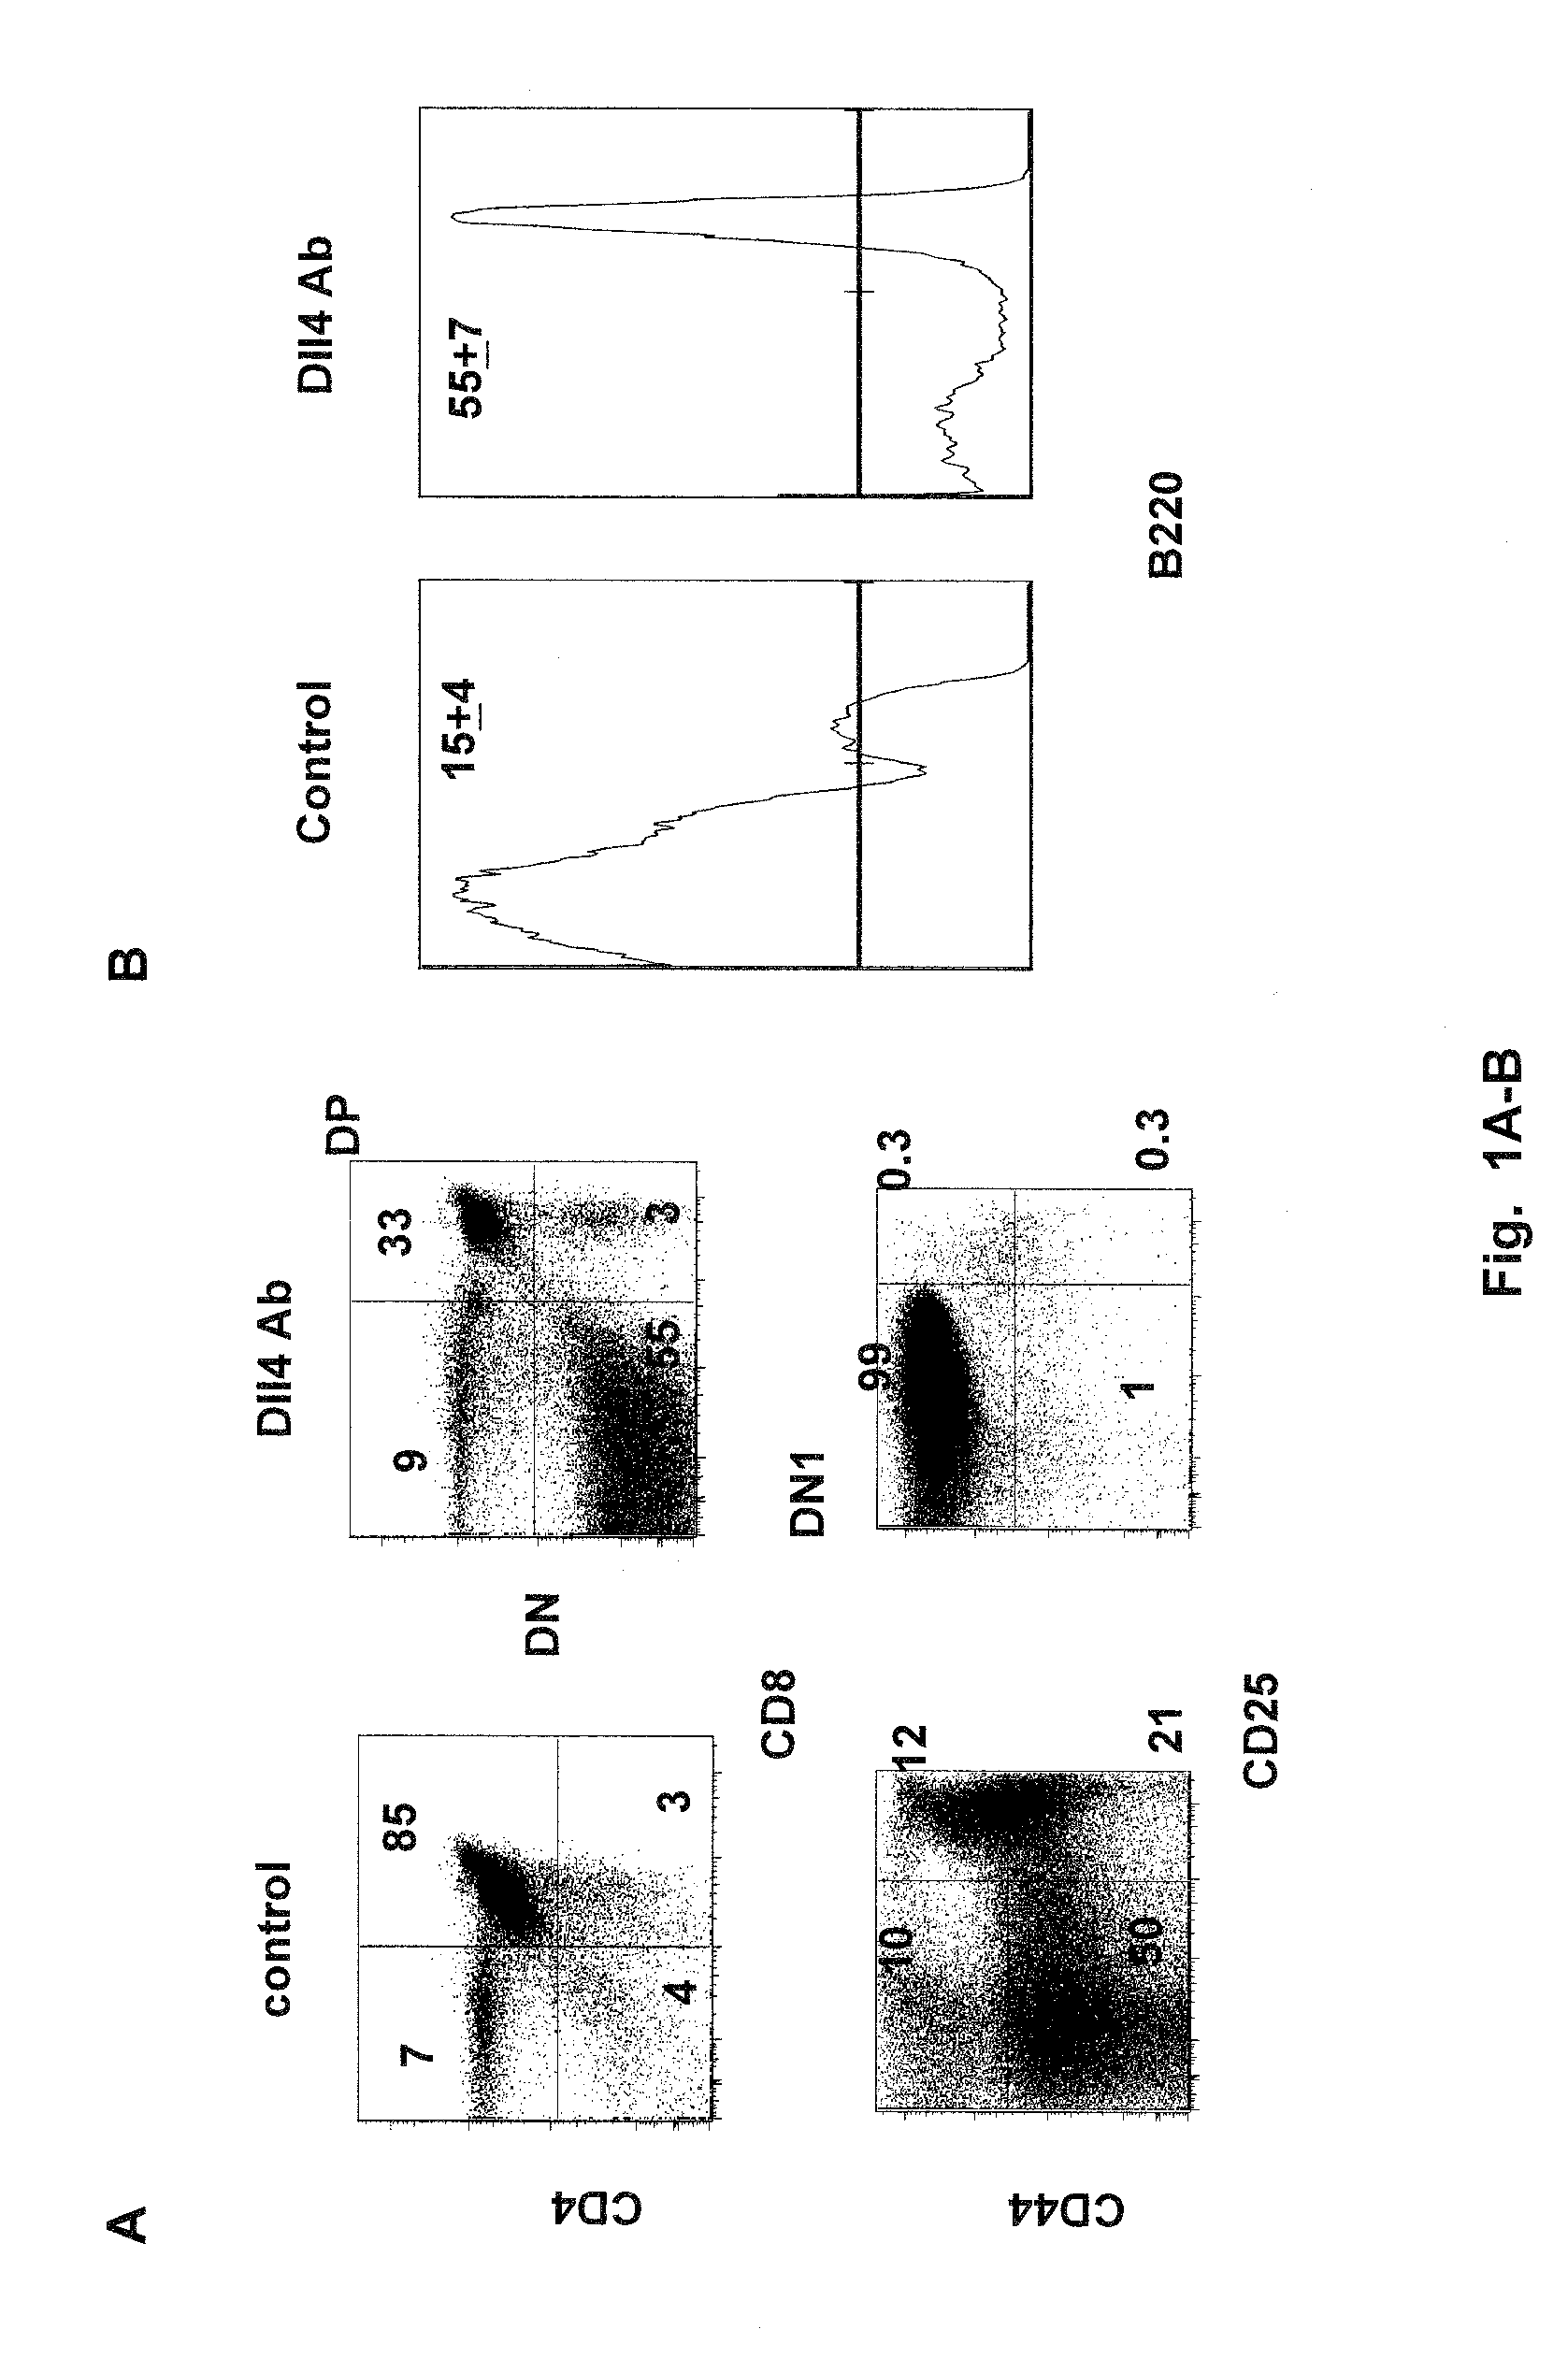 Methods of treating autoimmune diseases with dll4 antagonists